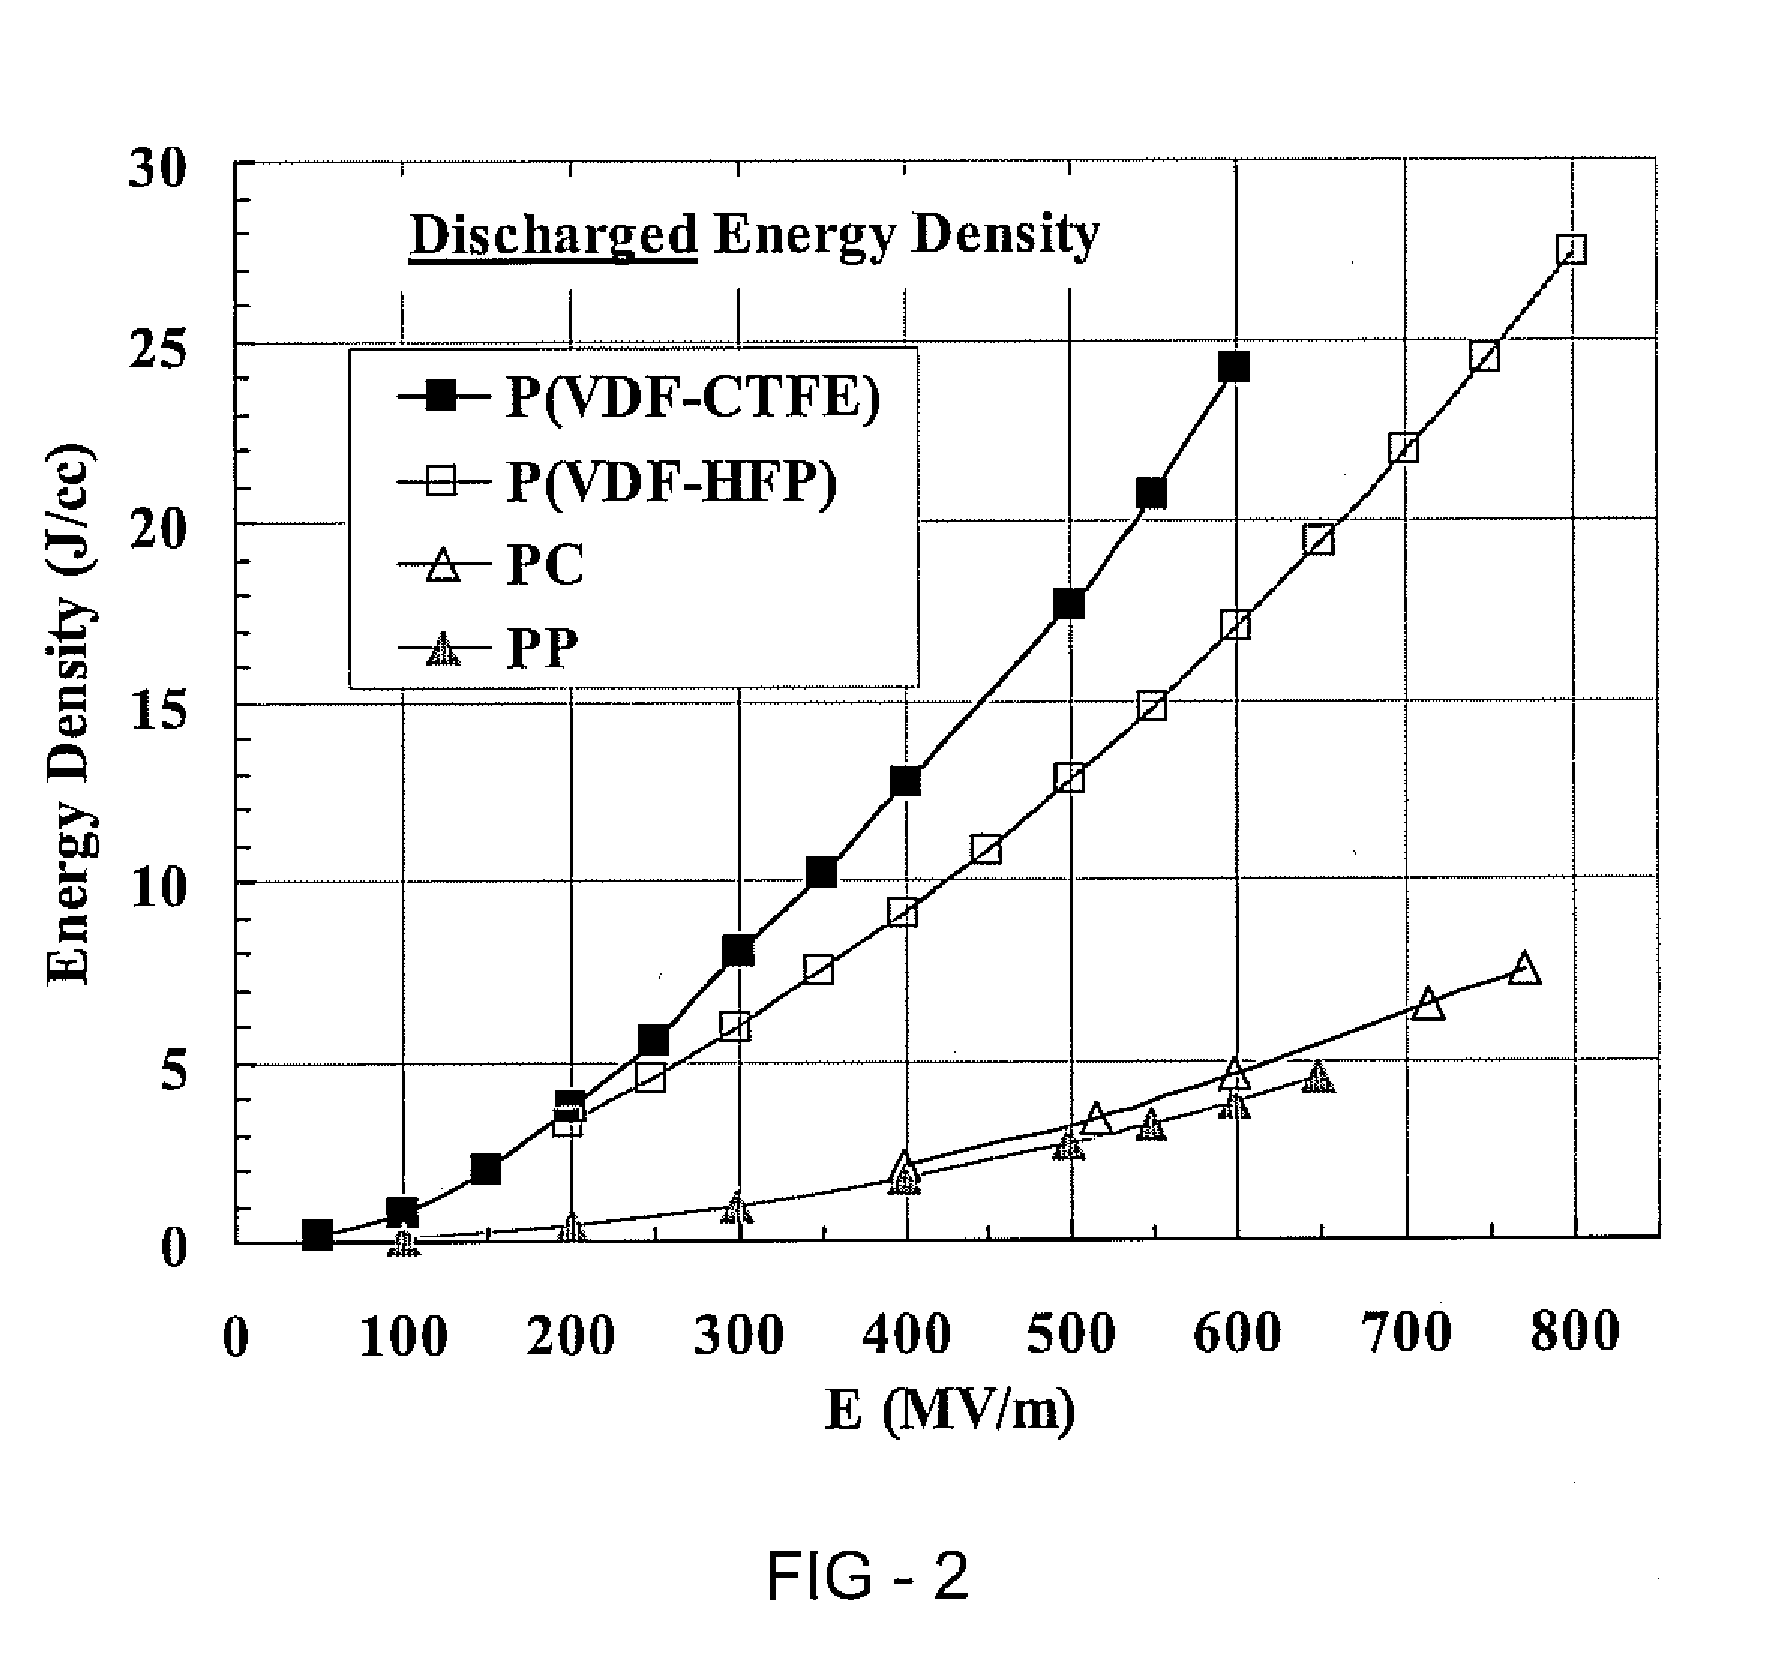 High electric energy density polymeric compositions, methods of the manufacture therefor, and articles comprising the same